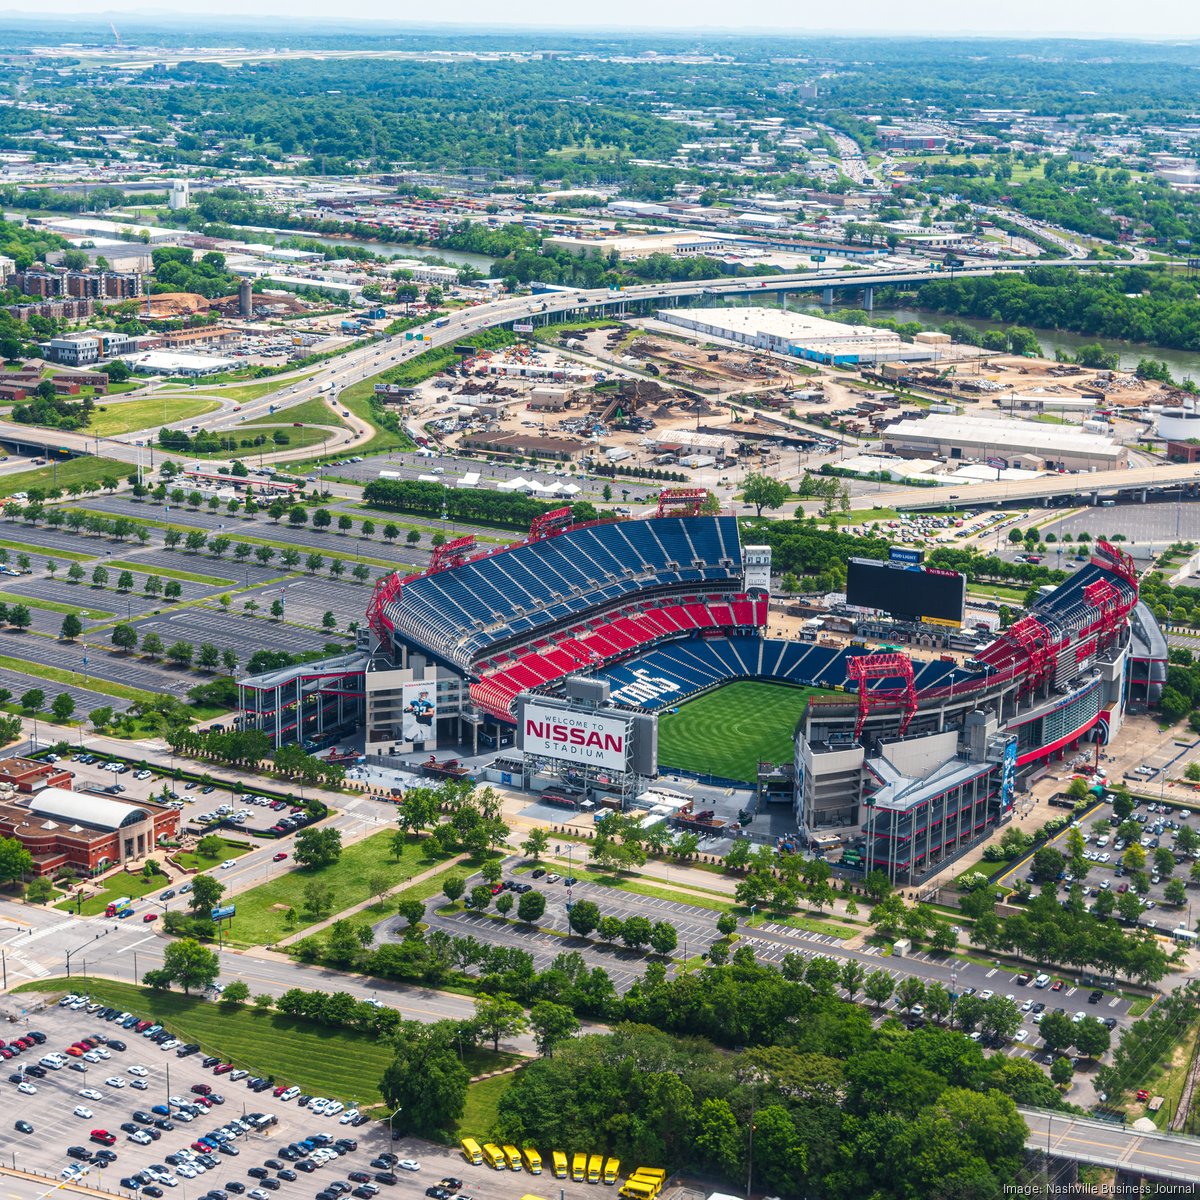 Nissan Stadium upgrades: Plans are underway as Tennessee Titans win